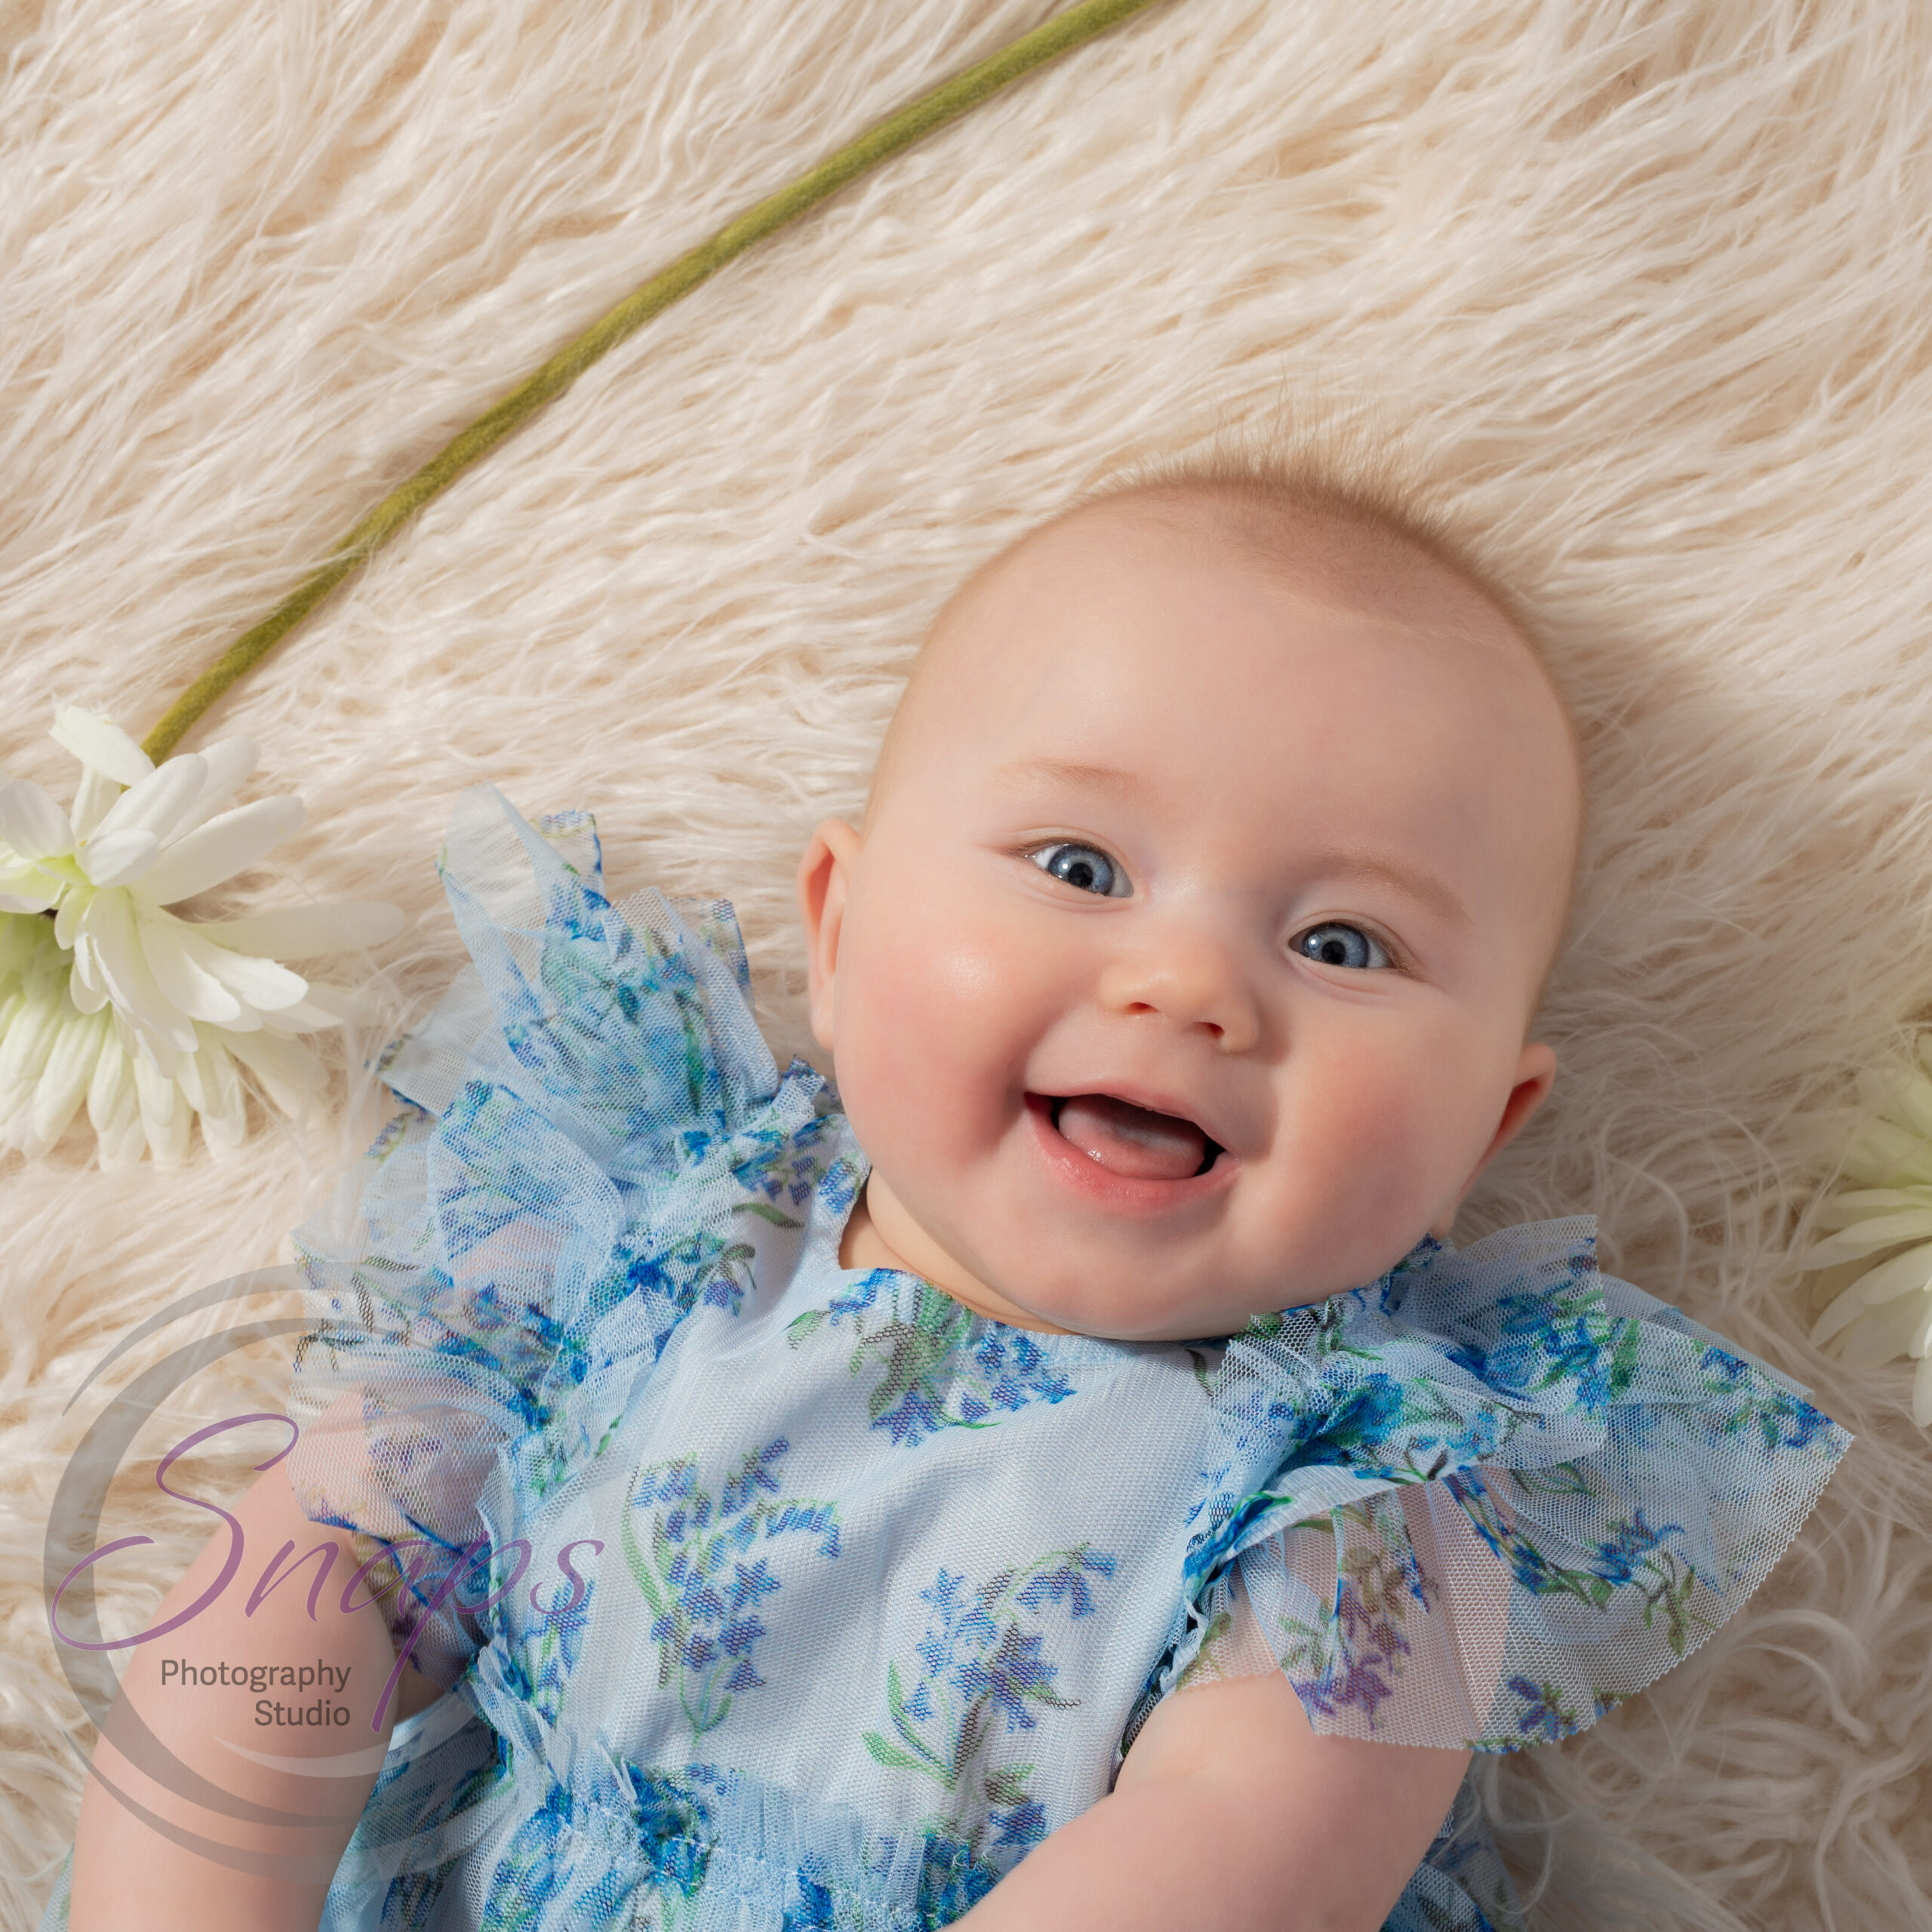 baby in a blue dress smiling with a flower